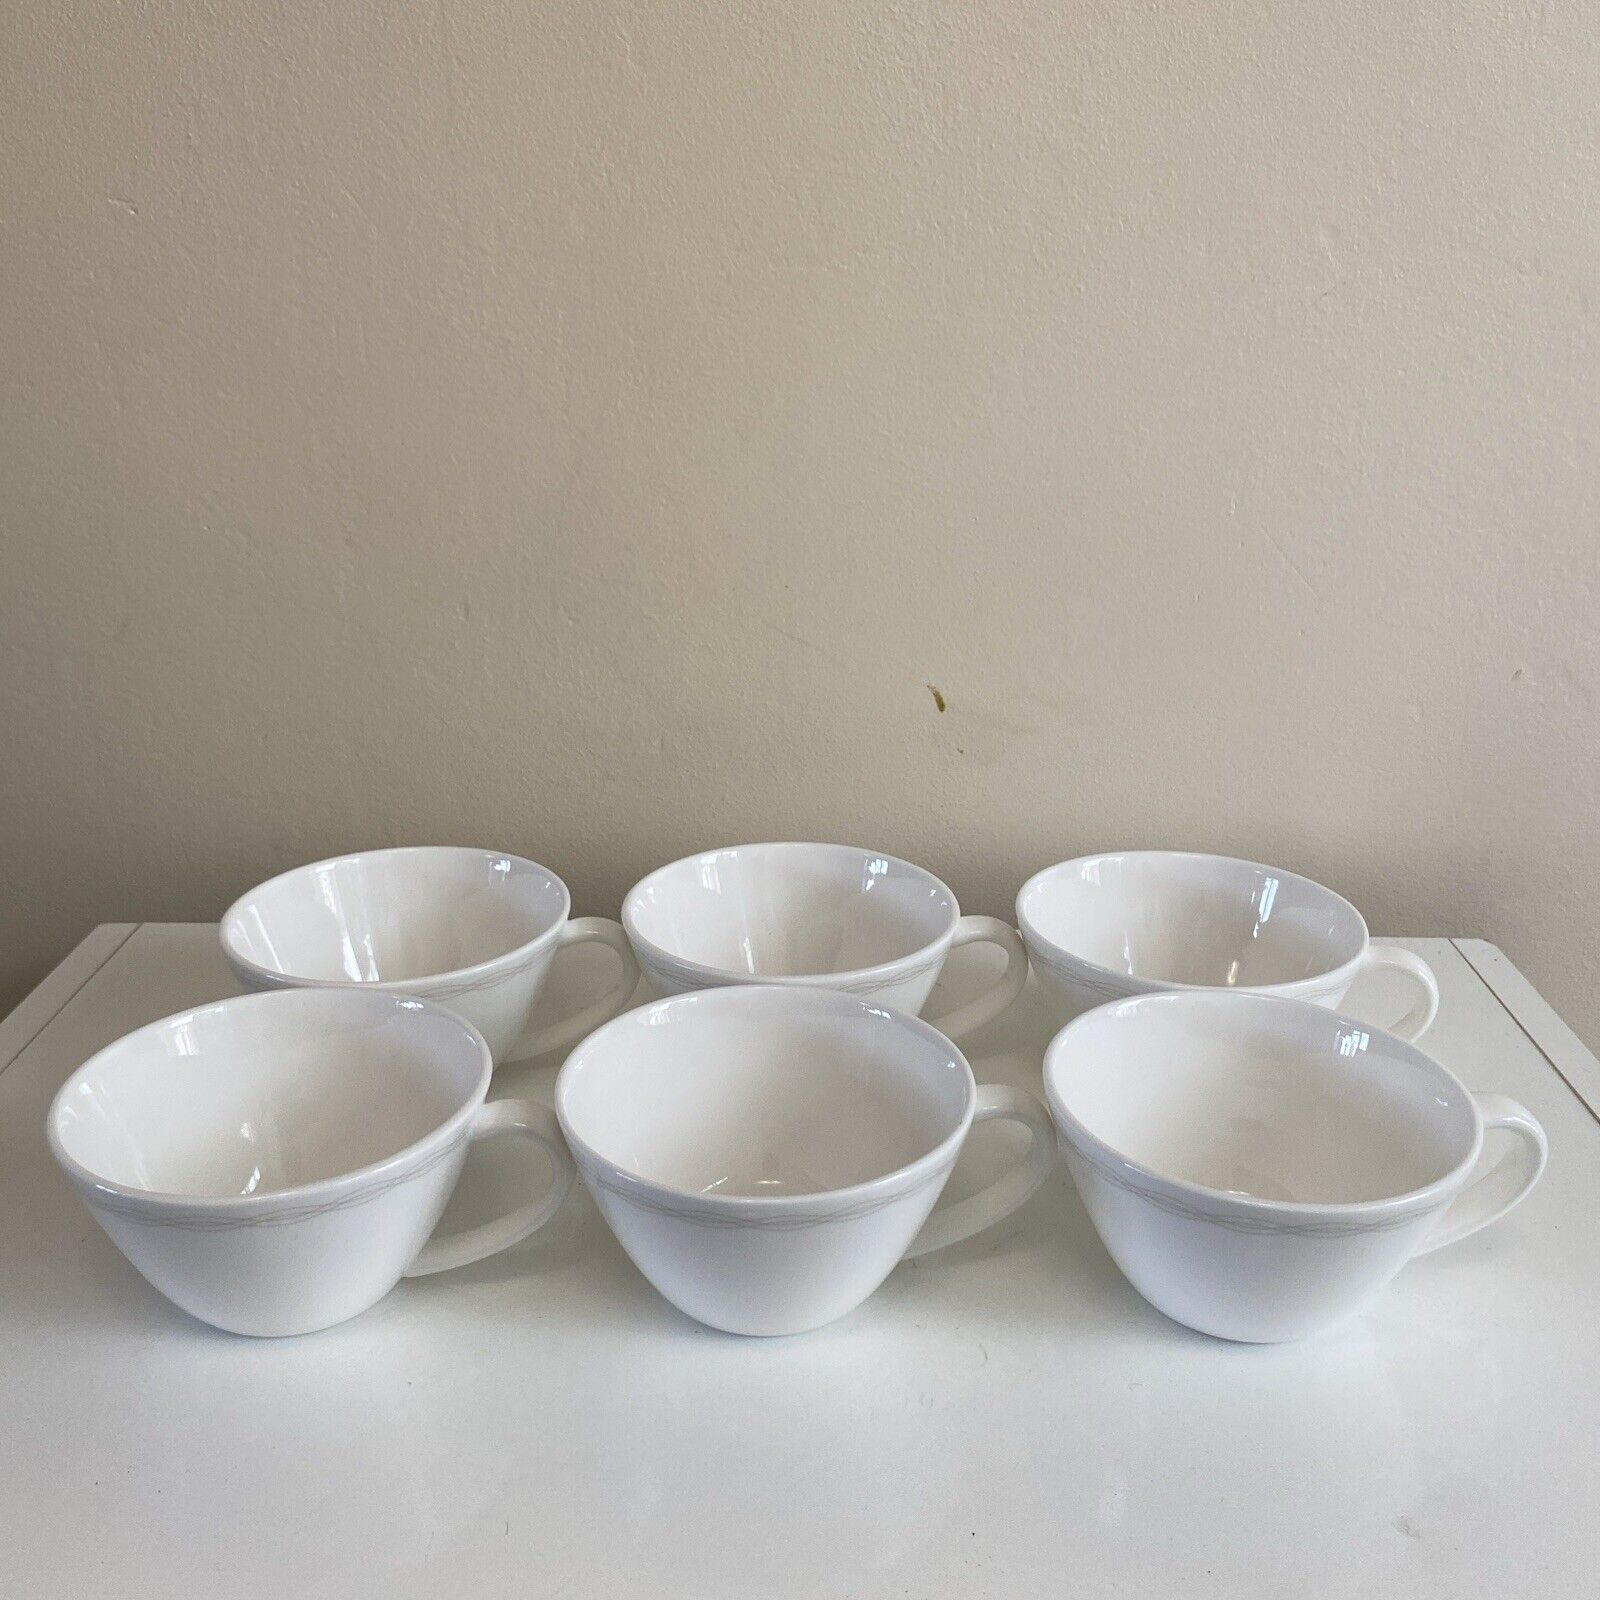 6 Wedgewood Official British Airways 1st Class Tea Cups New